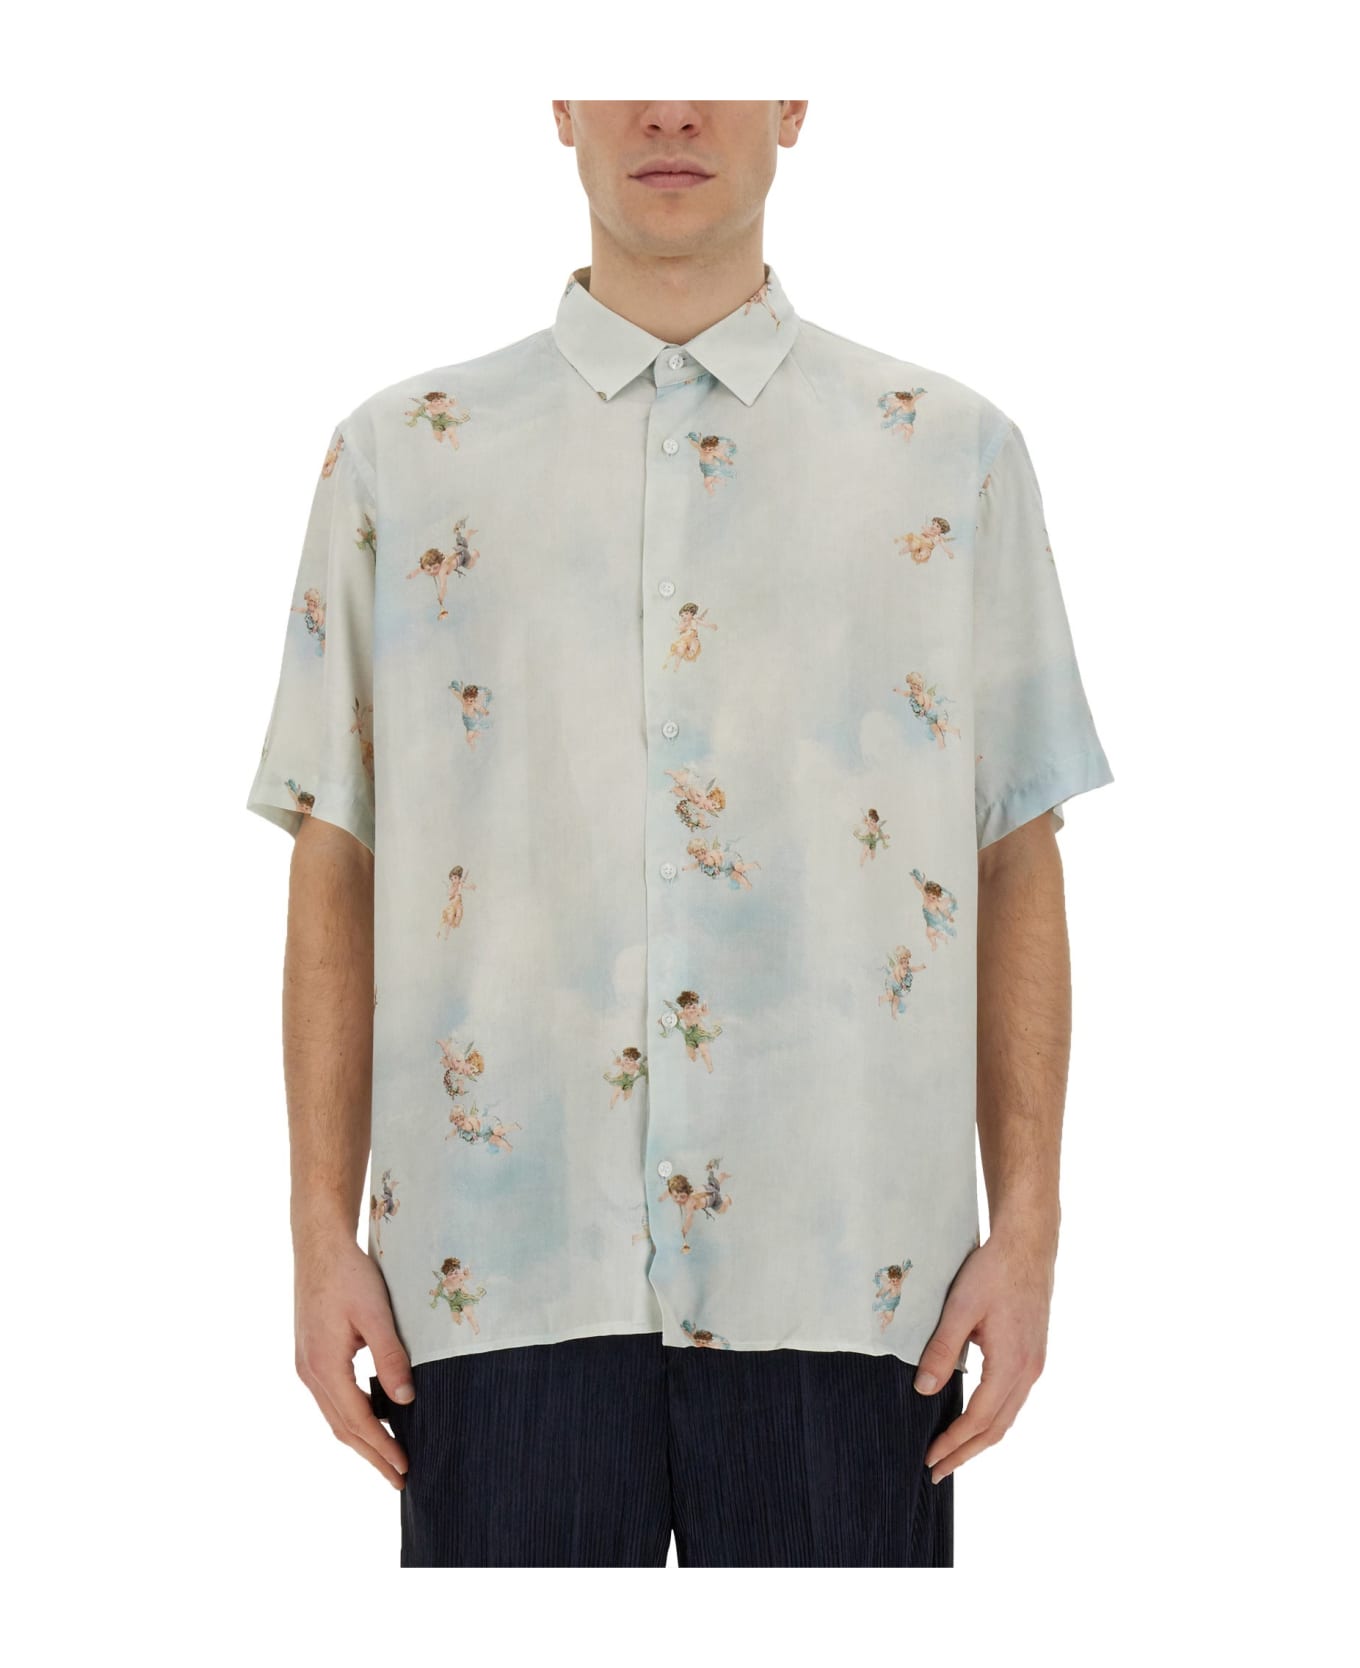 Family First Milano Printed Shirt - BLUE